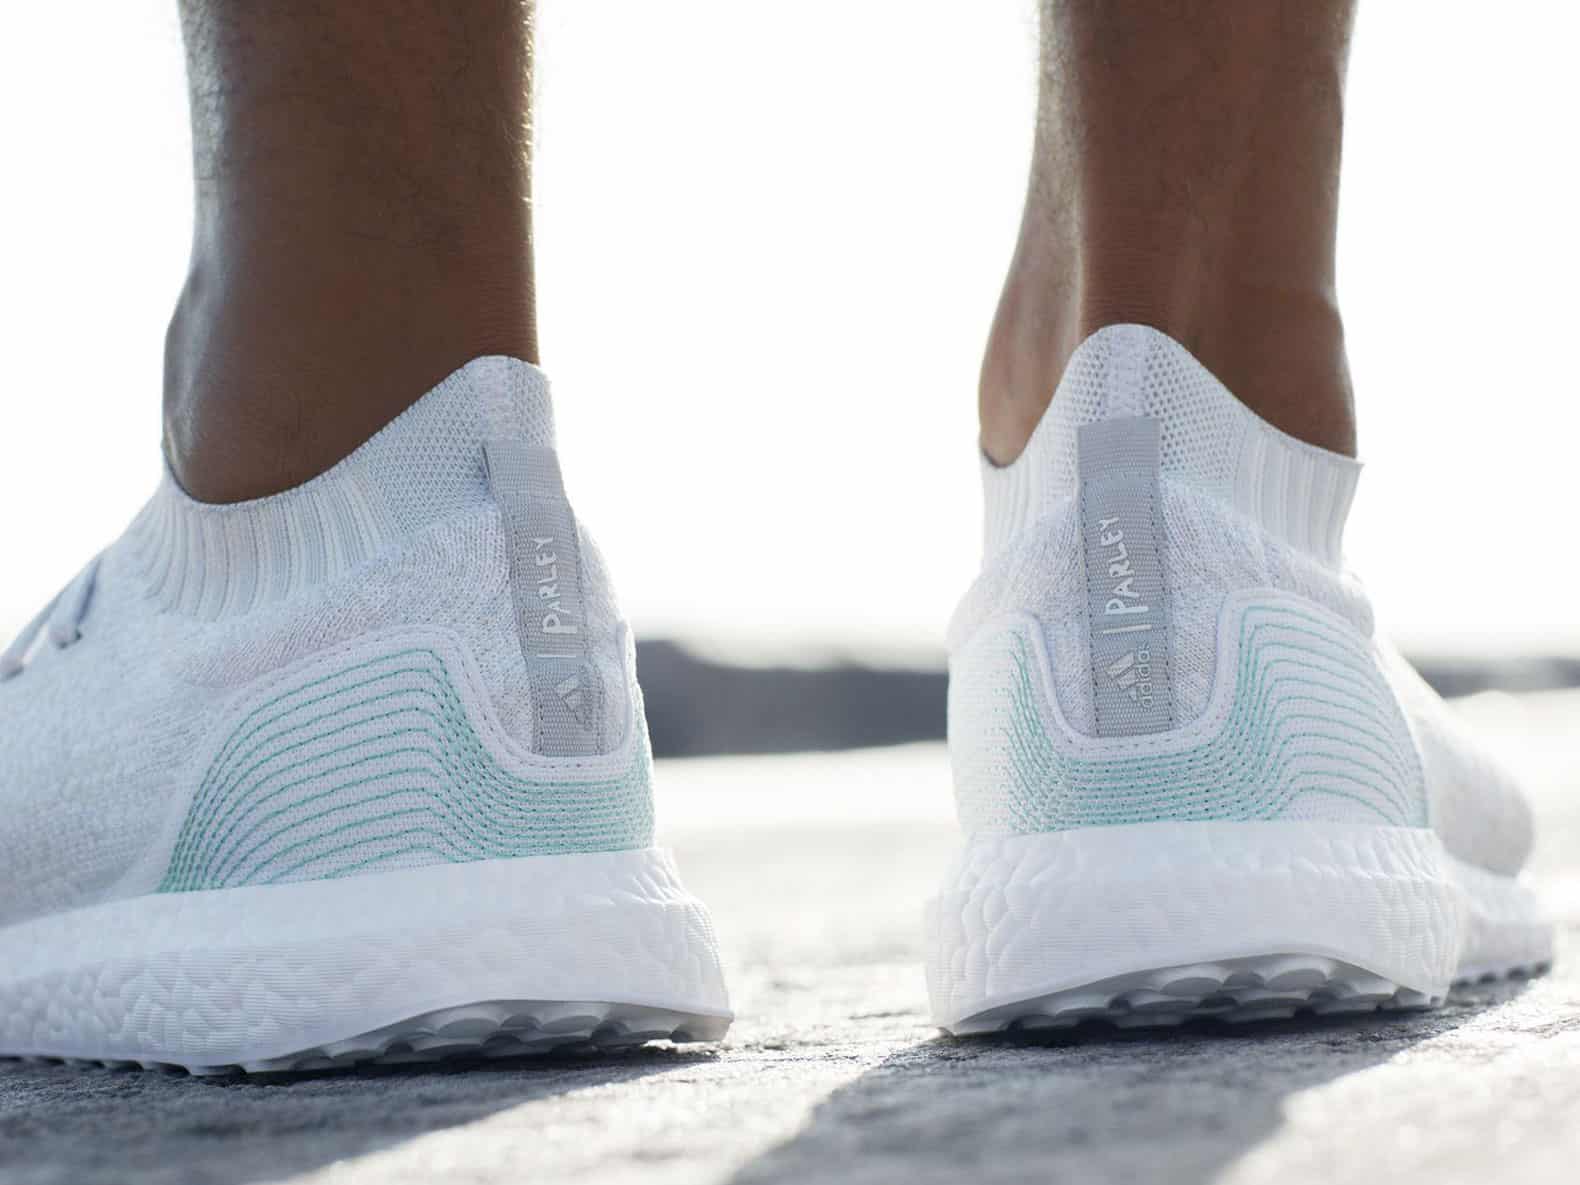 Credit: Adidas x Parley for the Oceans